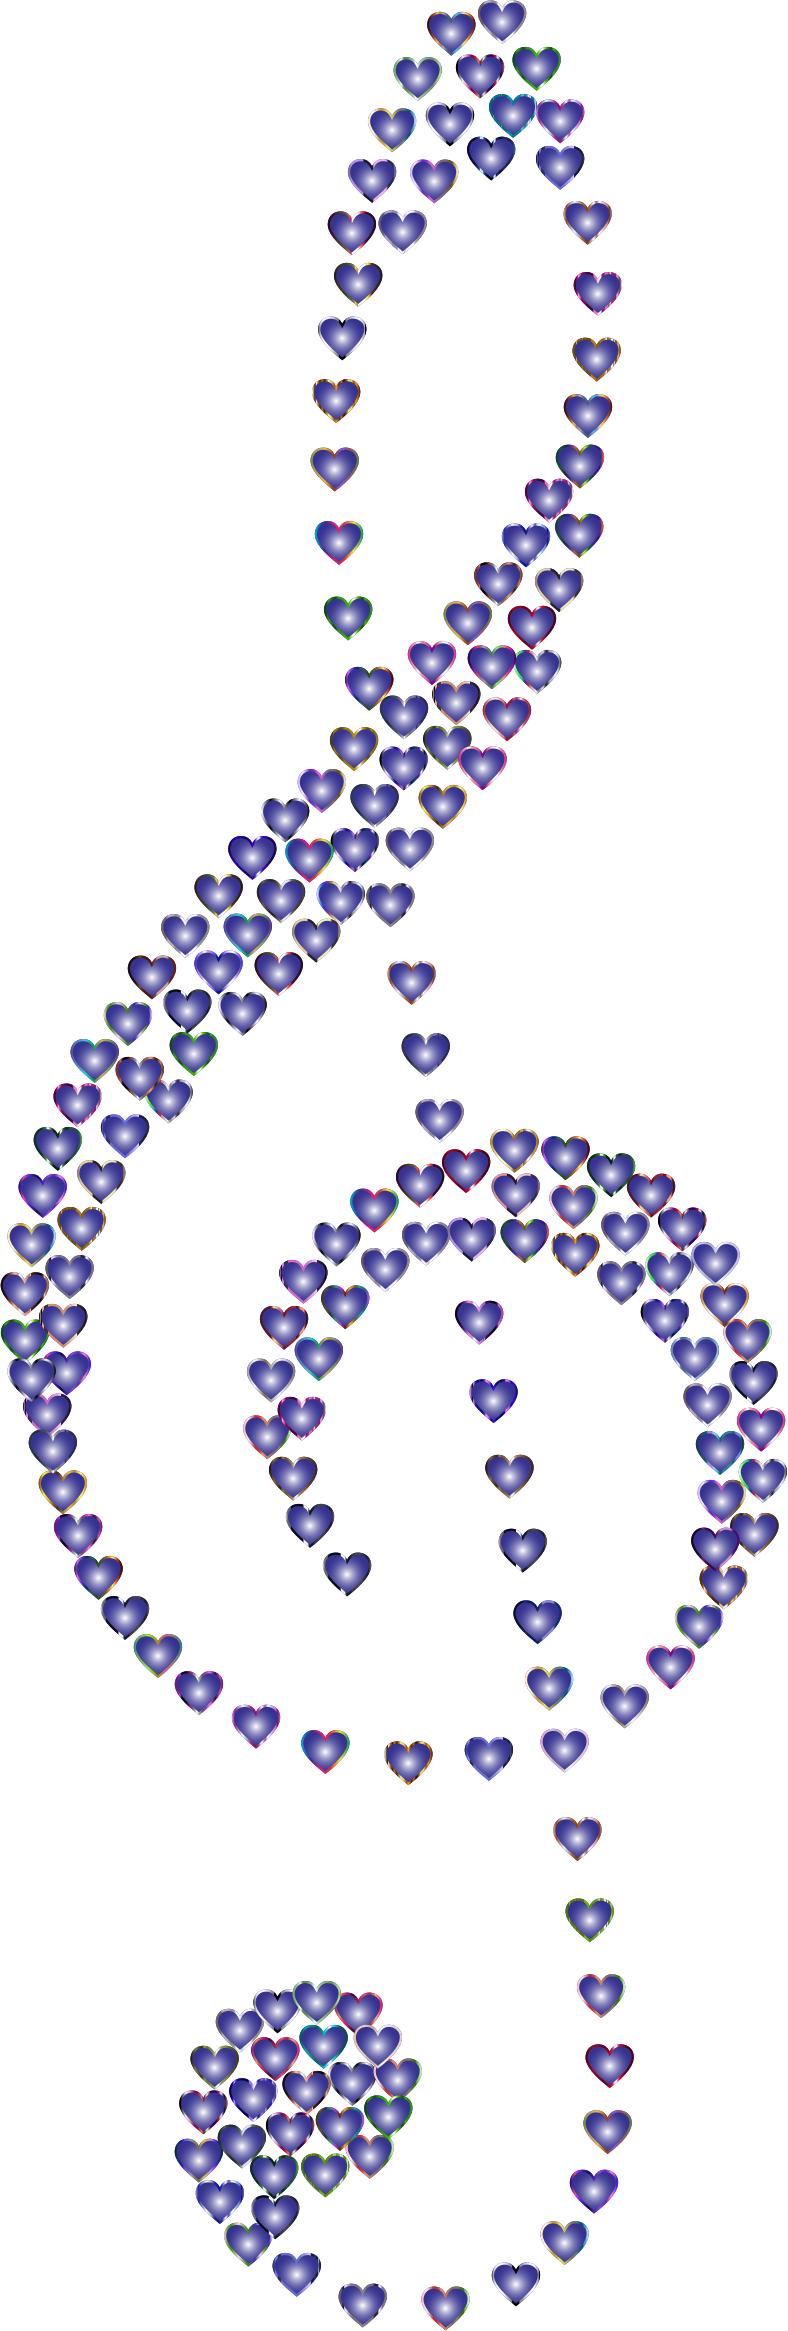 Prismatic Clef Hearts 10 No Background png